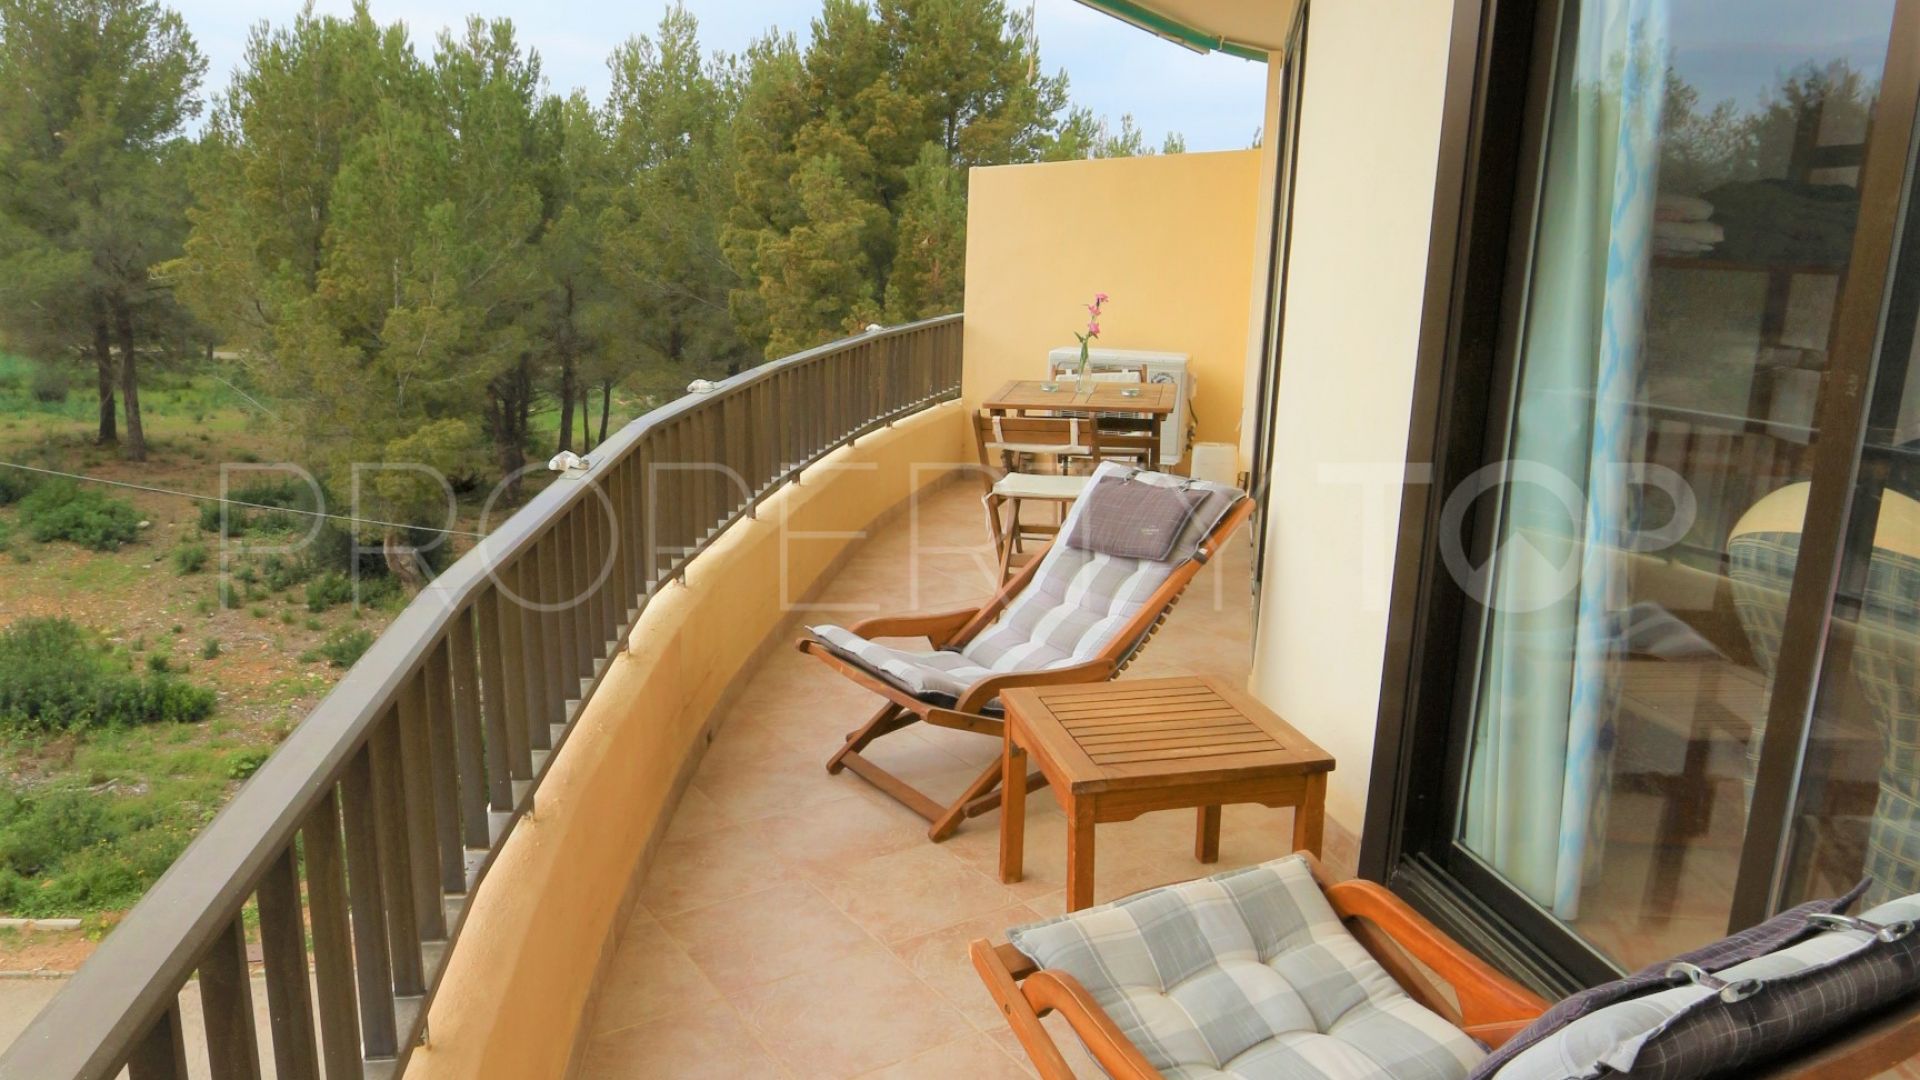 Apartment for sale in Artà with 1 bedroom